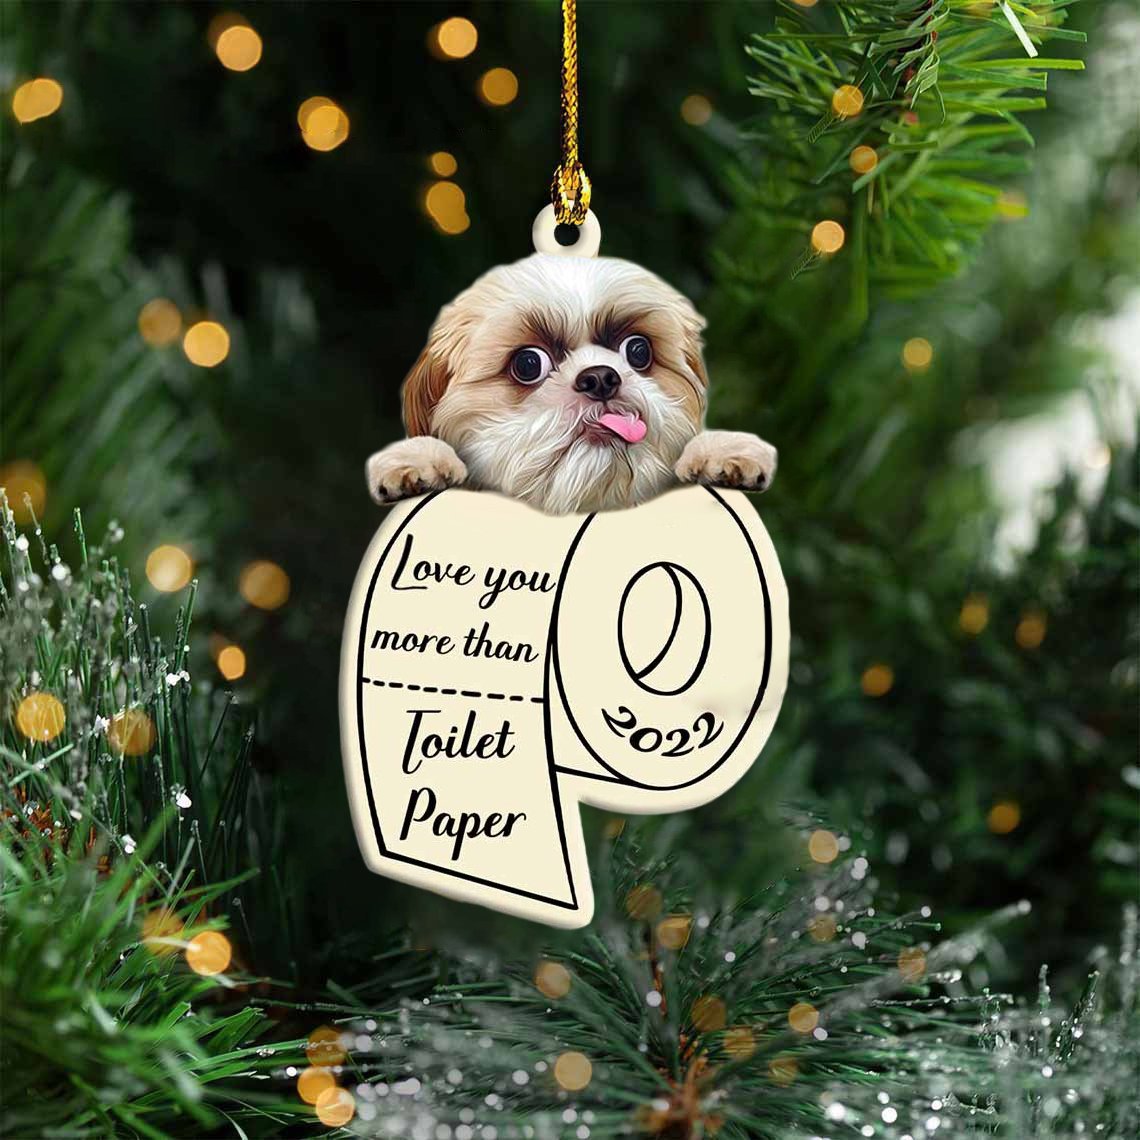 Shih Tzu Love You More Than Toilet Paper 2022 Hanging Ornament